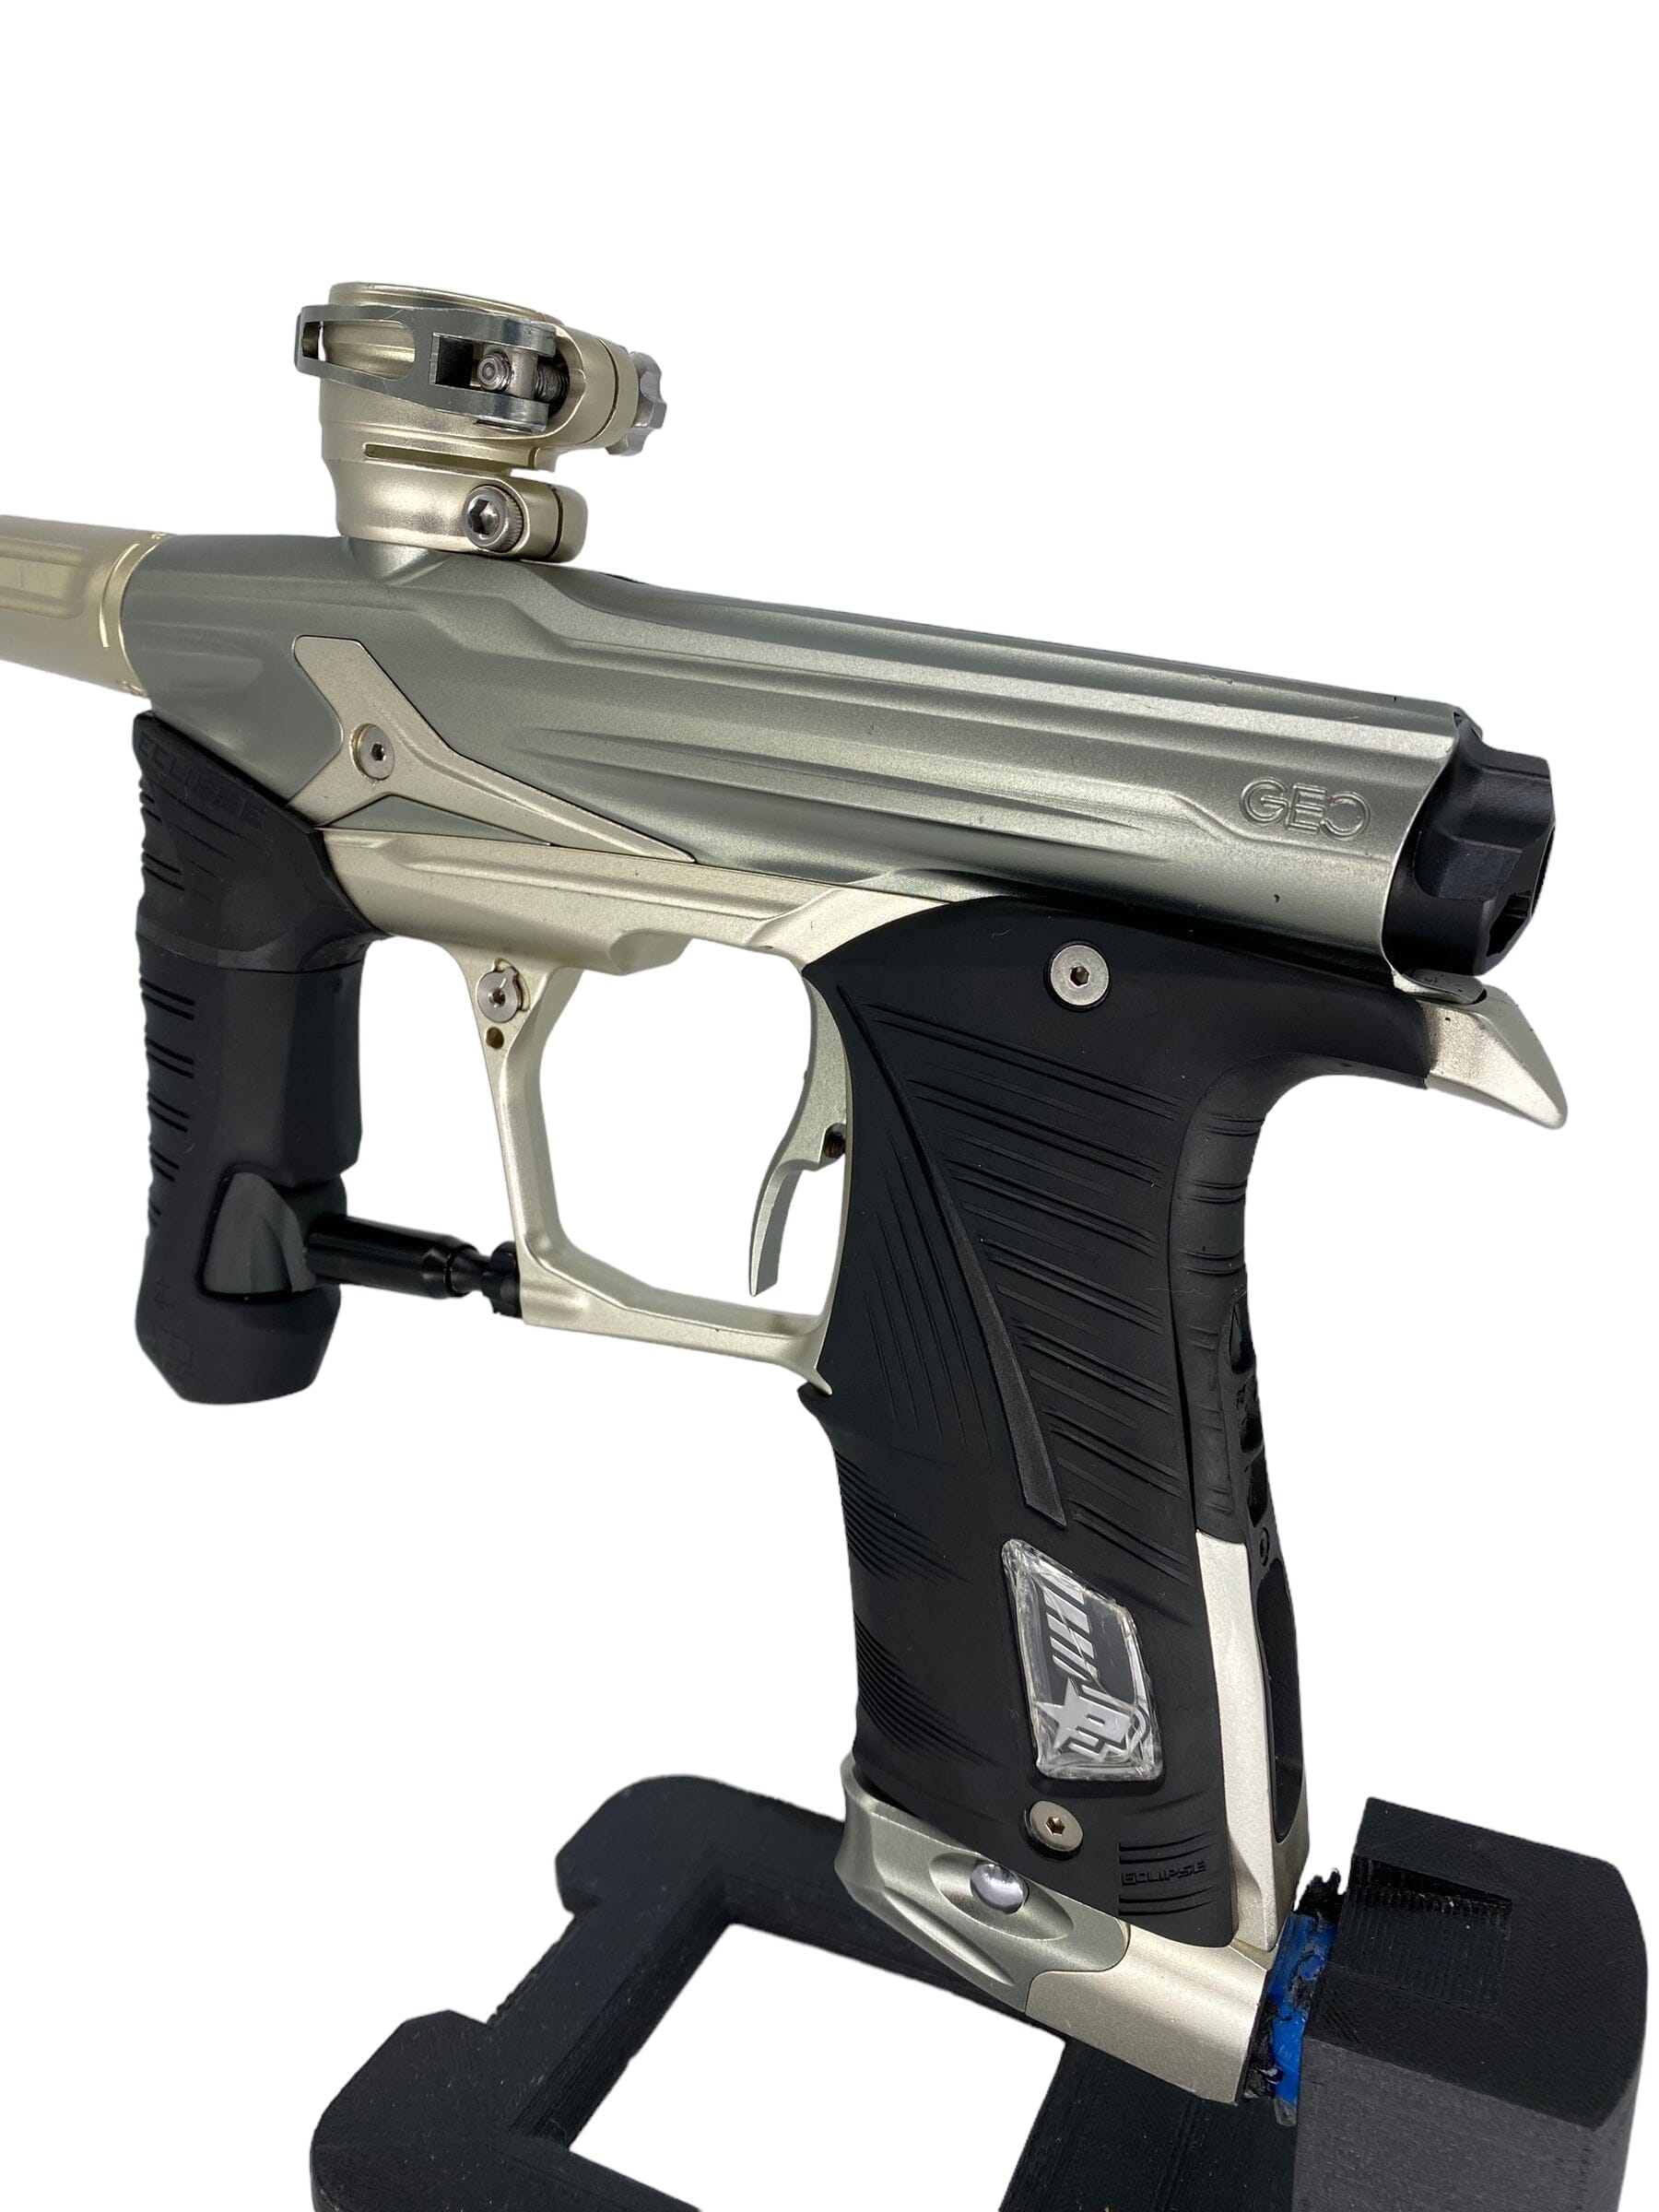 Used Planet Eclipse Geo 3.1 Paintball Gun Paintball Gun from CPXBrosPaintball Buy/Sell/Trade Paintball Markers, New Paintball Guns, Paintball Hoppers, Paintball Masks, and Hormesis Headbands